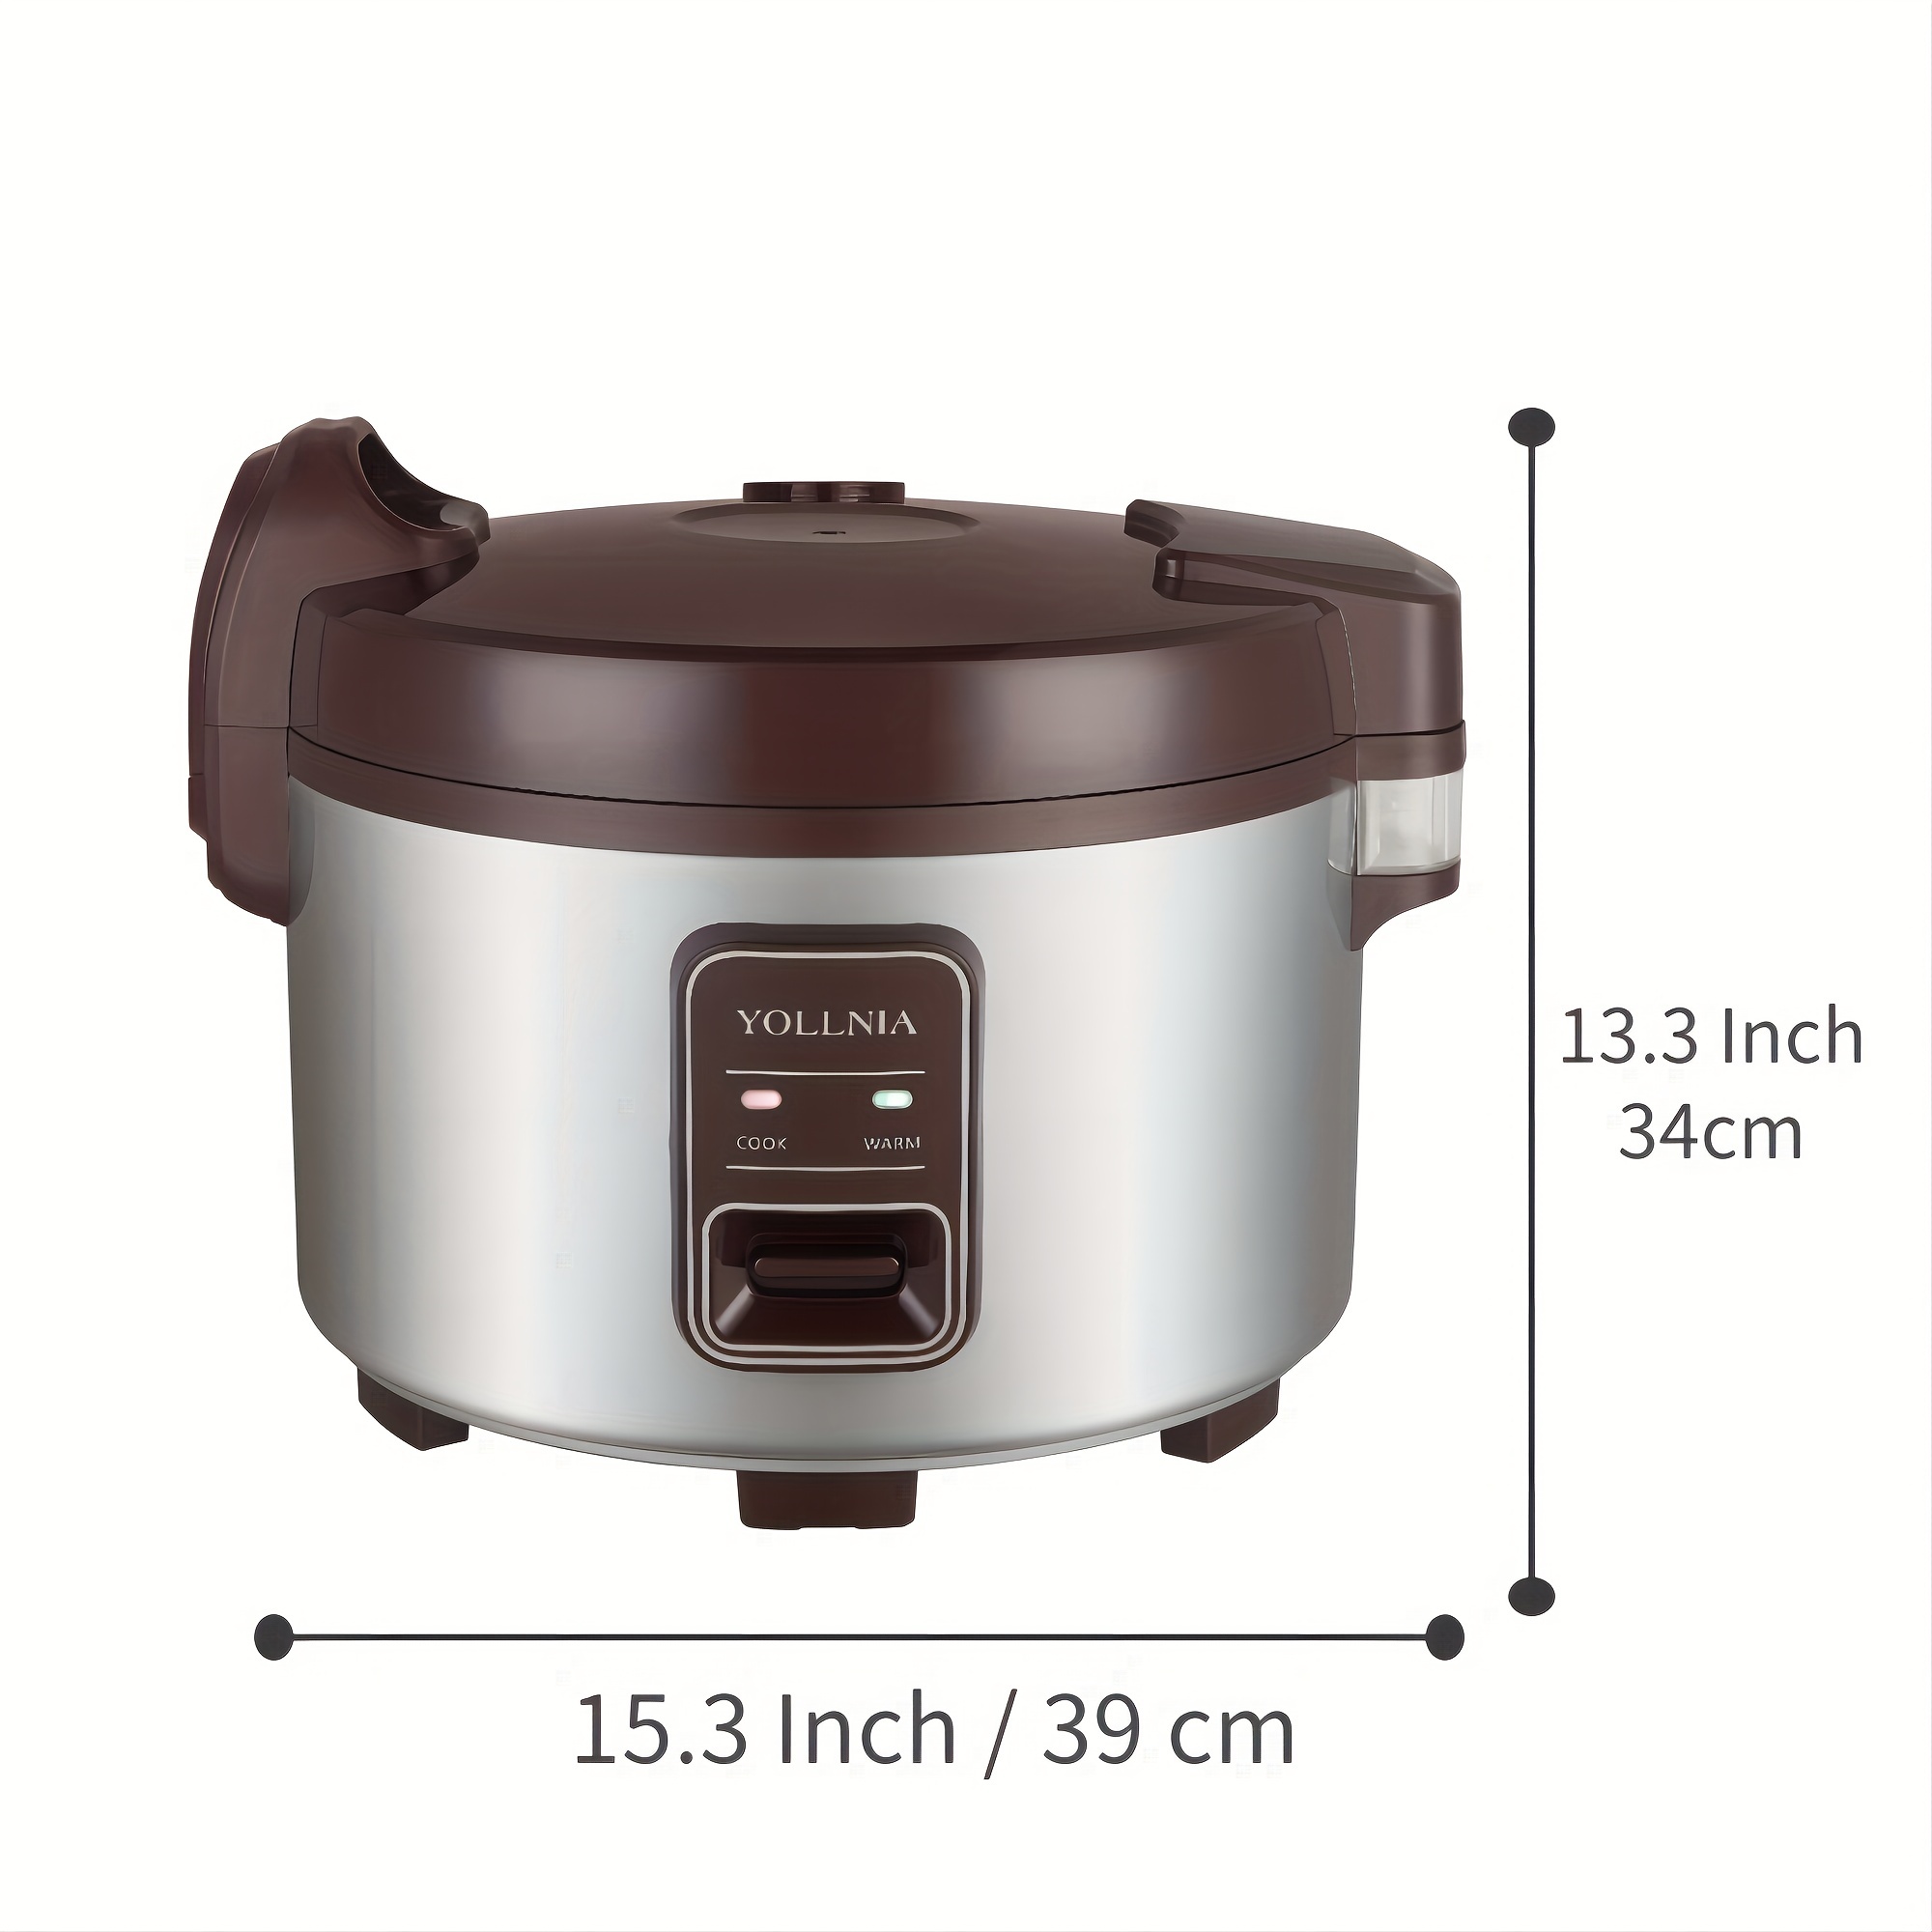 110V Non-Stick Mini Rice Cooker with Steamer and 10 Cups, Stainless Steel  Inner Pot, Double-Layer Frying Pan, 12H Cooking Functions, Keep Warm